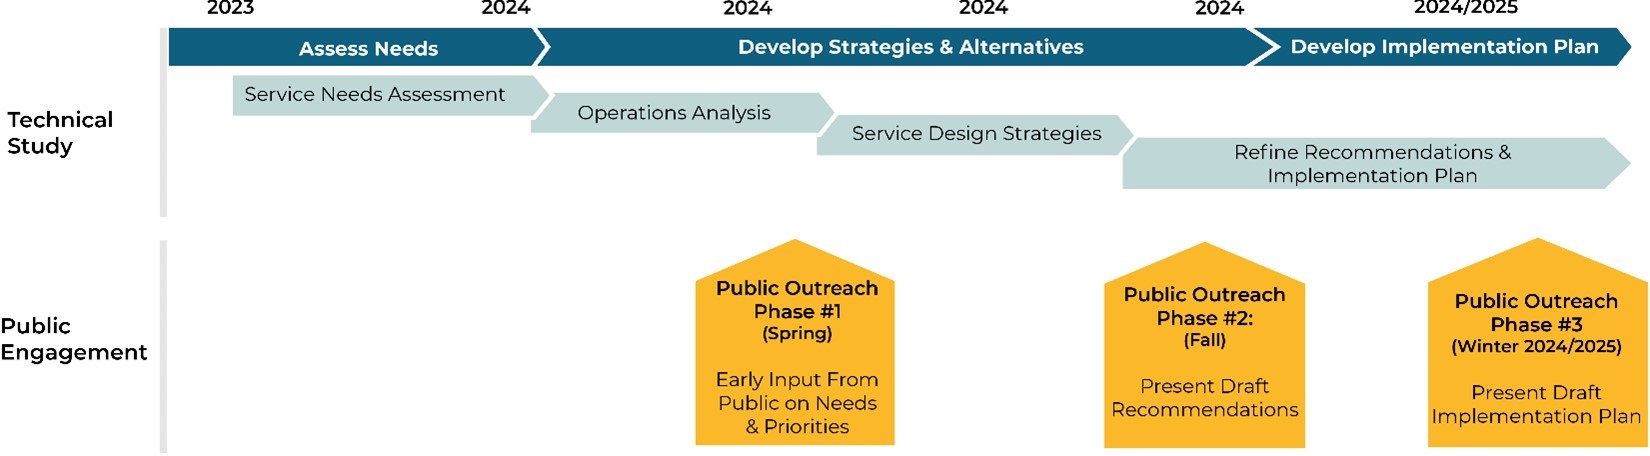 Graph from 2023 to 2025 displaying 3 public outreach sessions and 4 technical studies